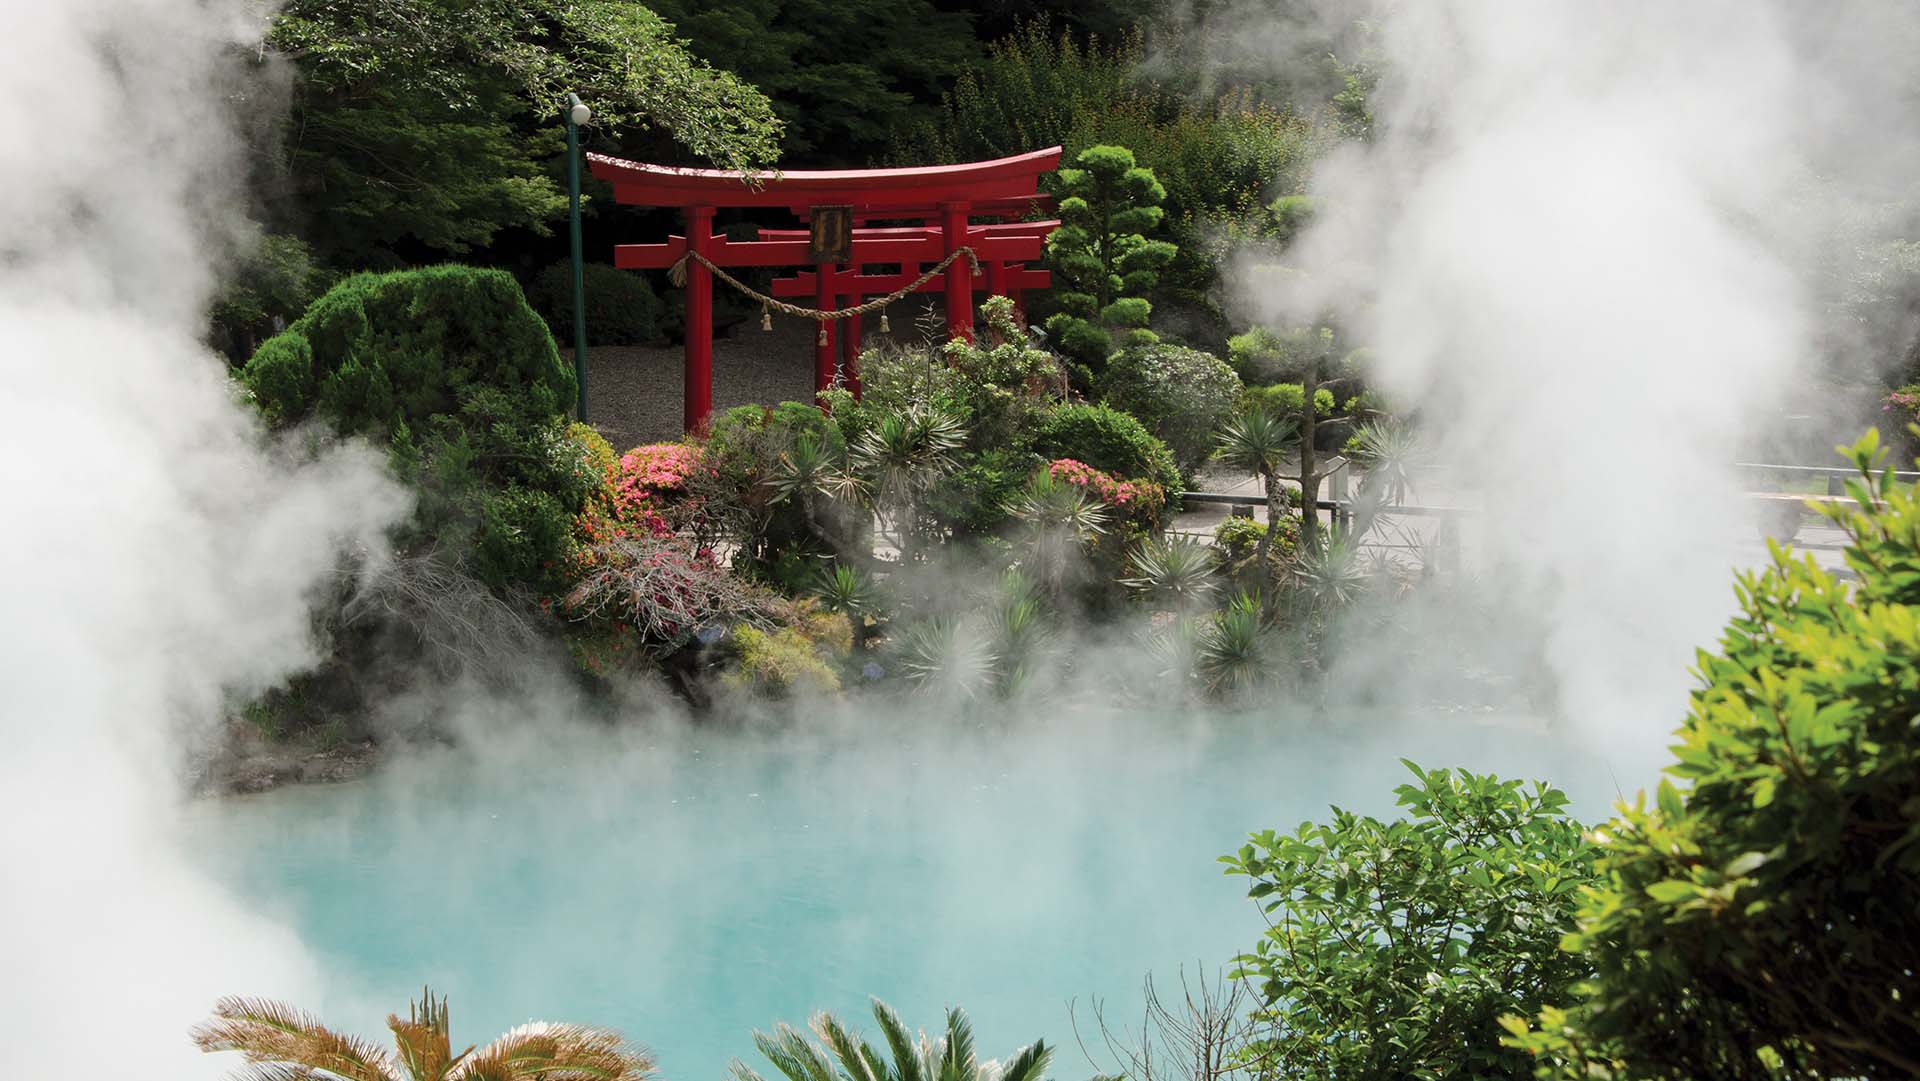 The Sea Hell, one of the eight hells (Jigoku), multi-colored volcanic pool of boiling water in Kannawa district in Beppu, Japan.